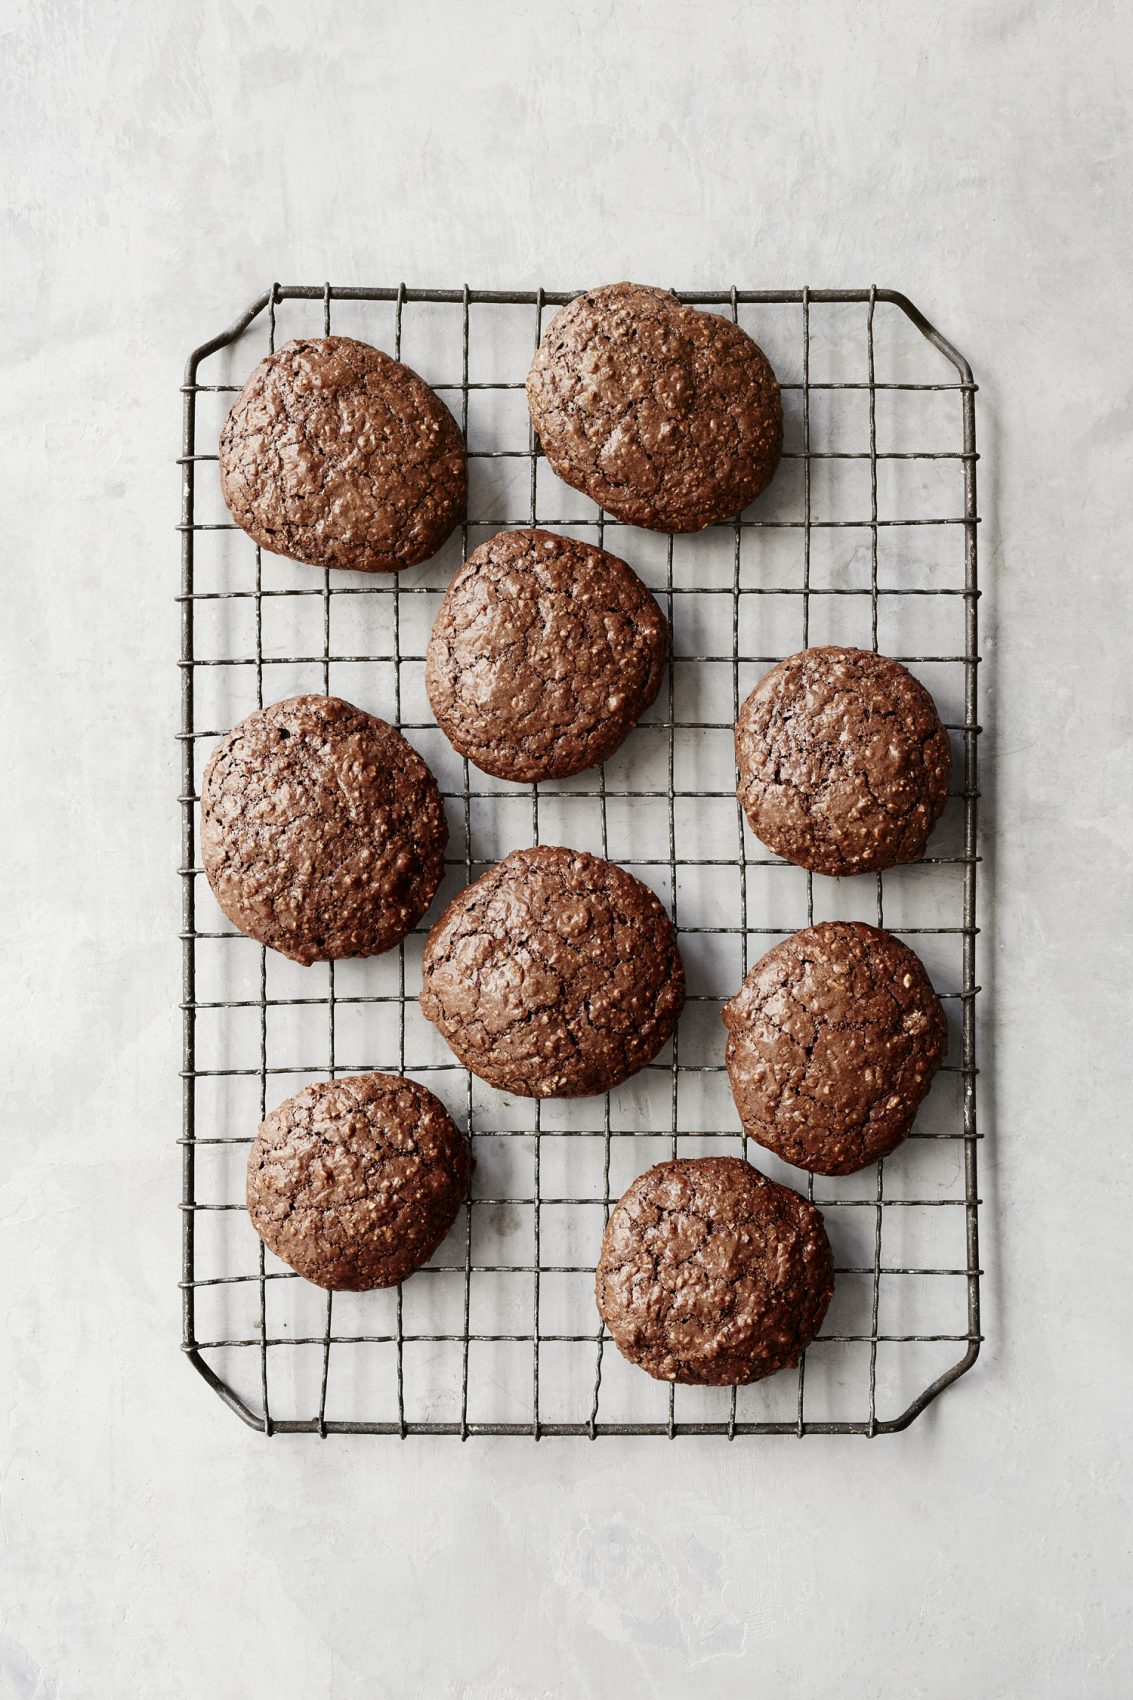 An image of flourless chocolate cookies, from Mark Bittman's &quot;How To Bake Everything.&quot; (Robert Bredvad / Houghton Mifflin Harcourt)